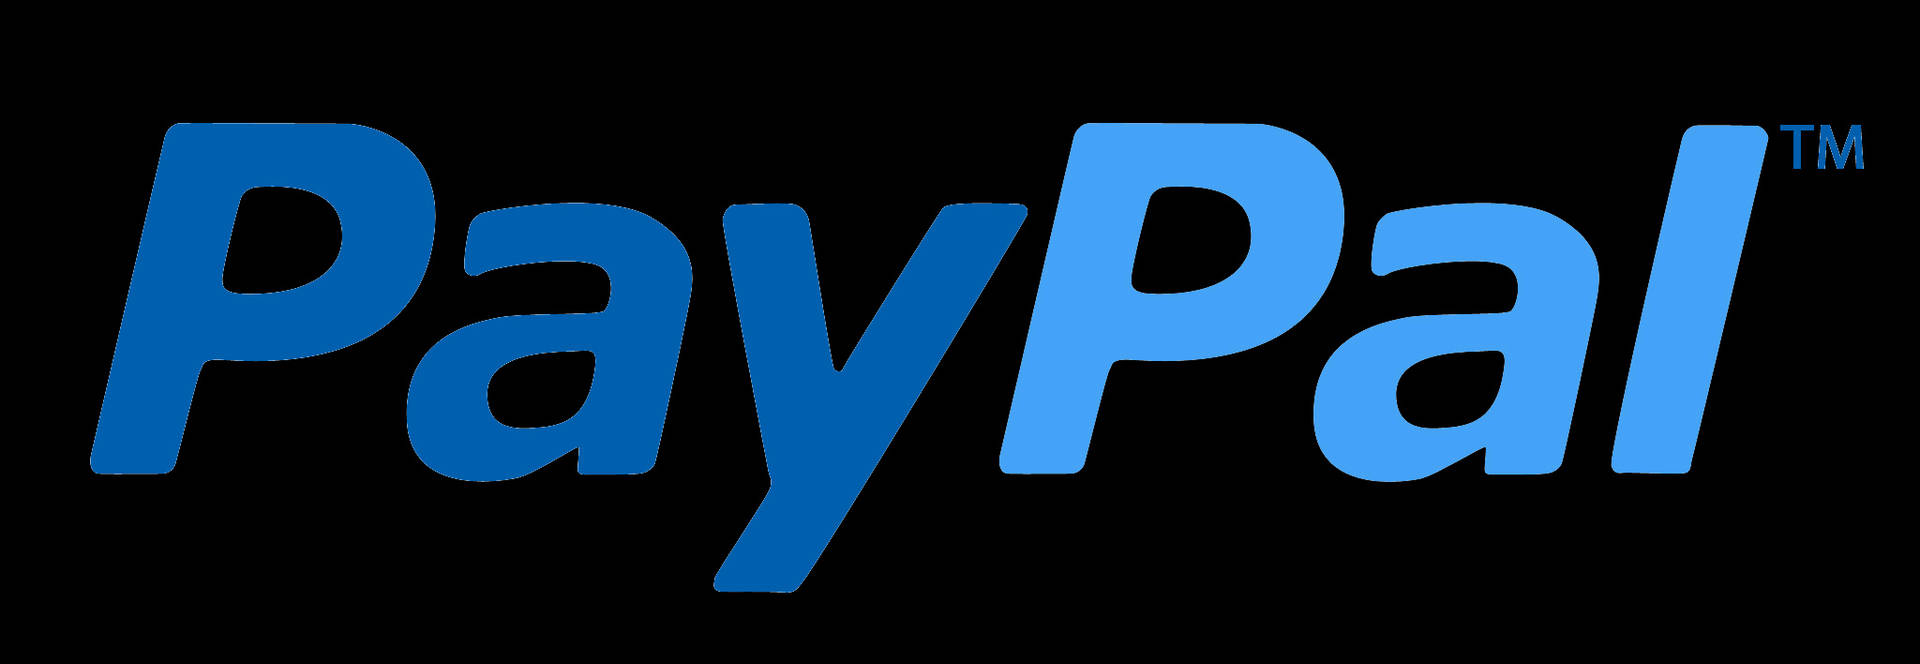 Paypal Name In Black Background Wallpaper